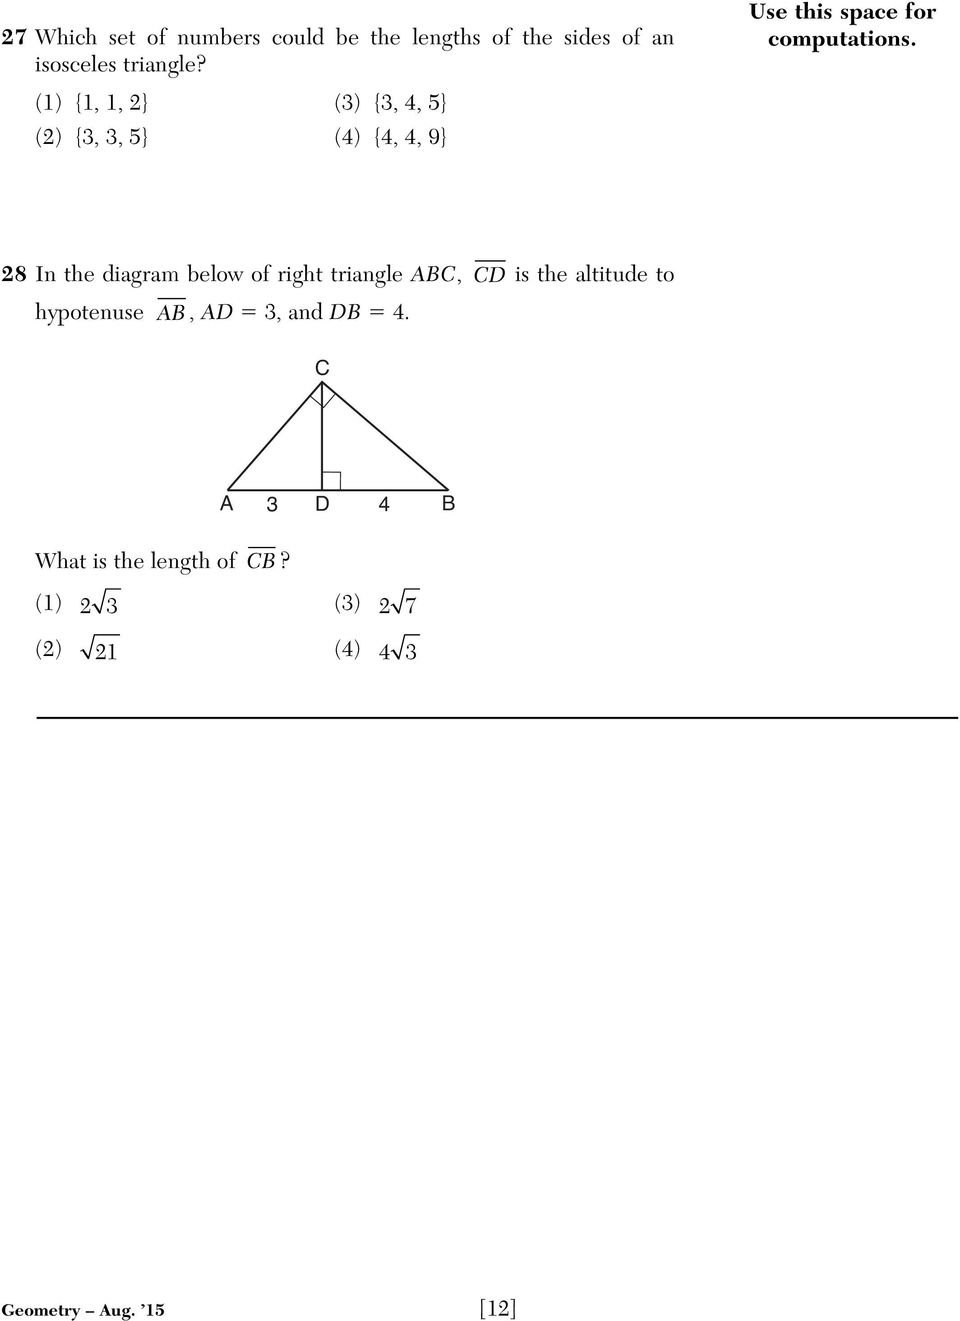 28 In the diagram below of right triangle ABC, CD is the altitude to hypotenuse AB, AD